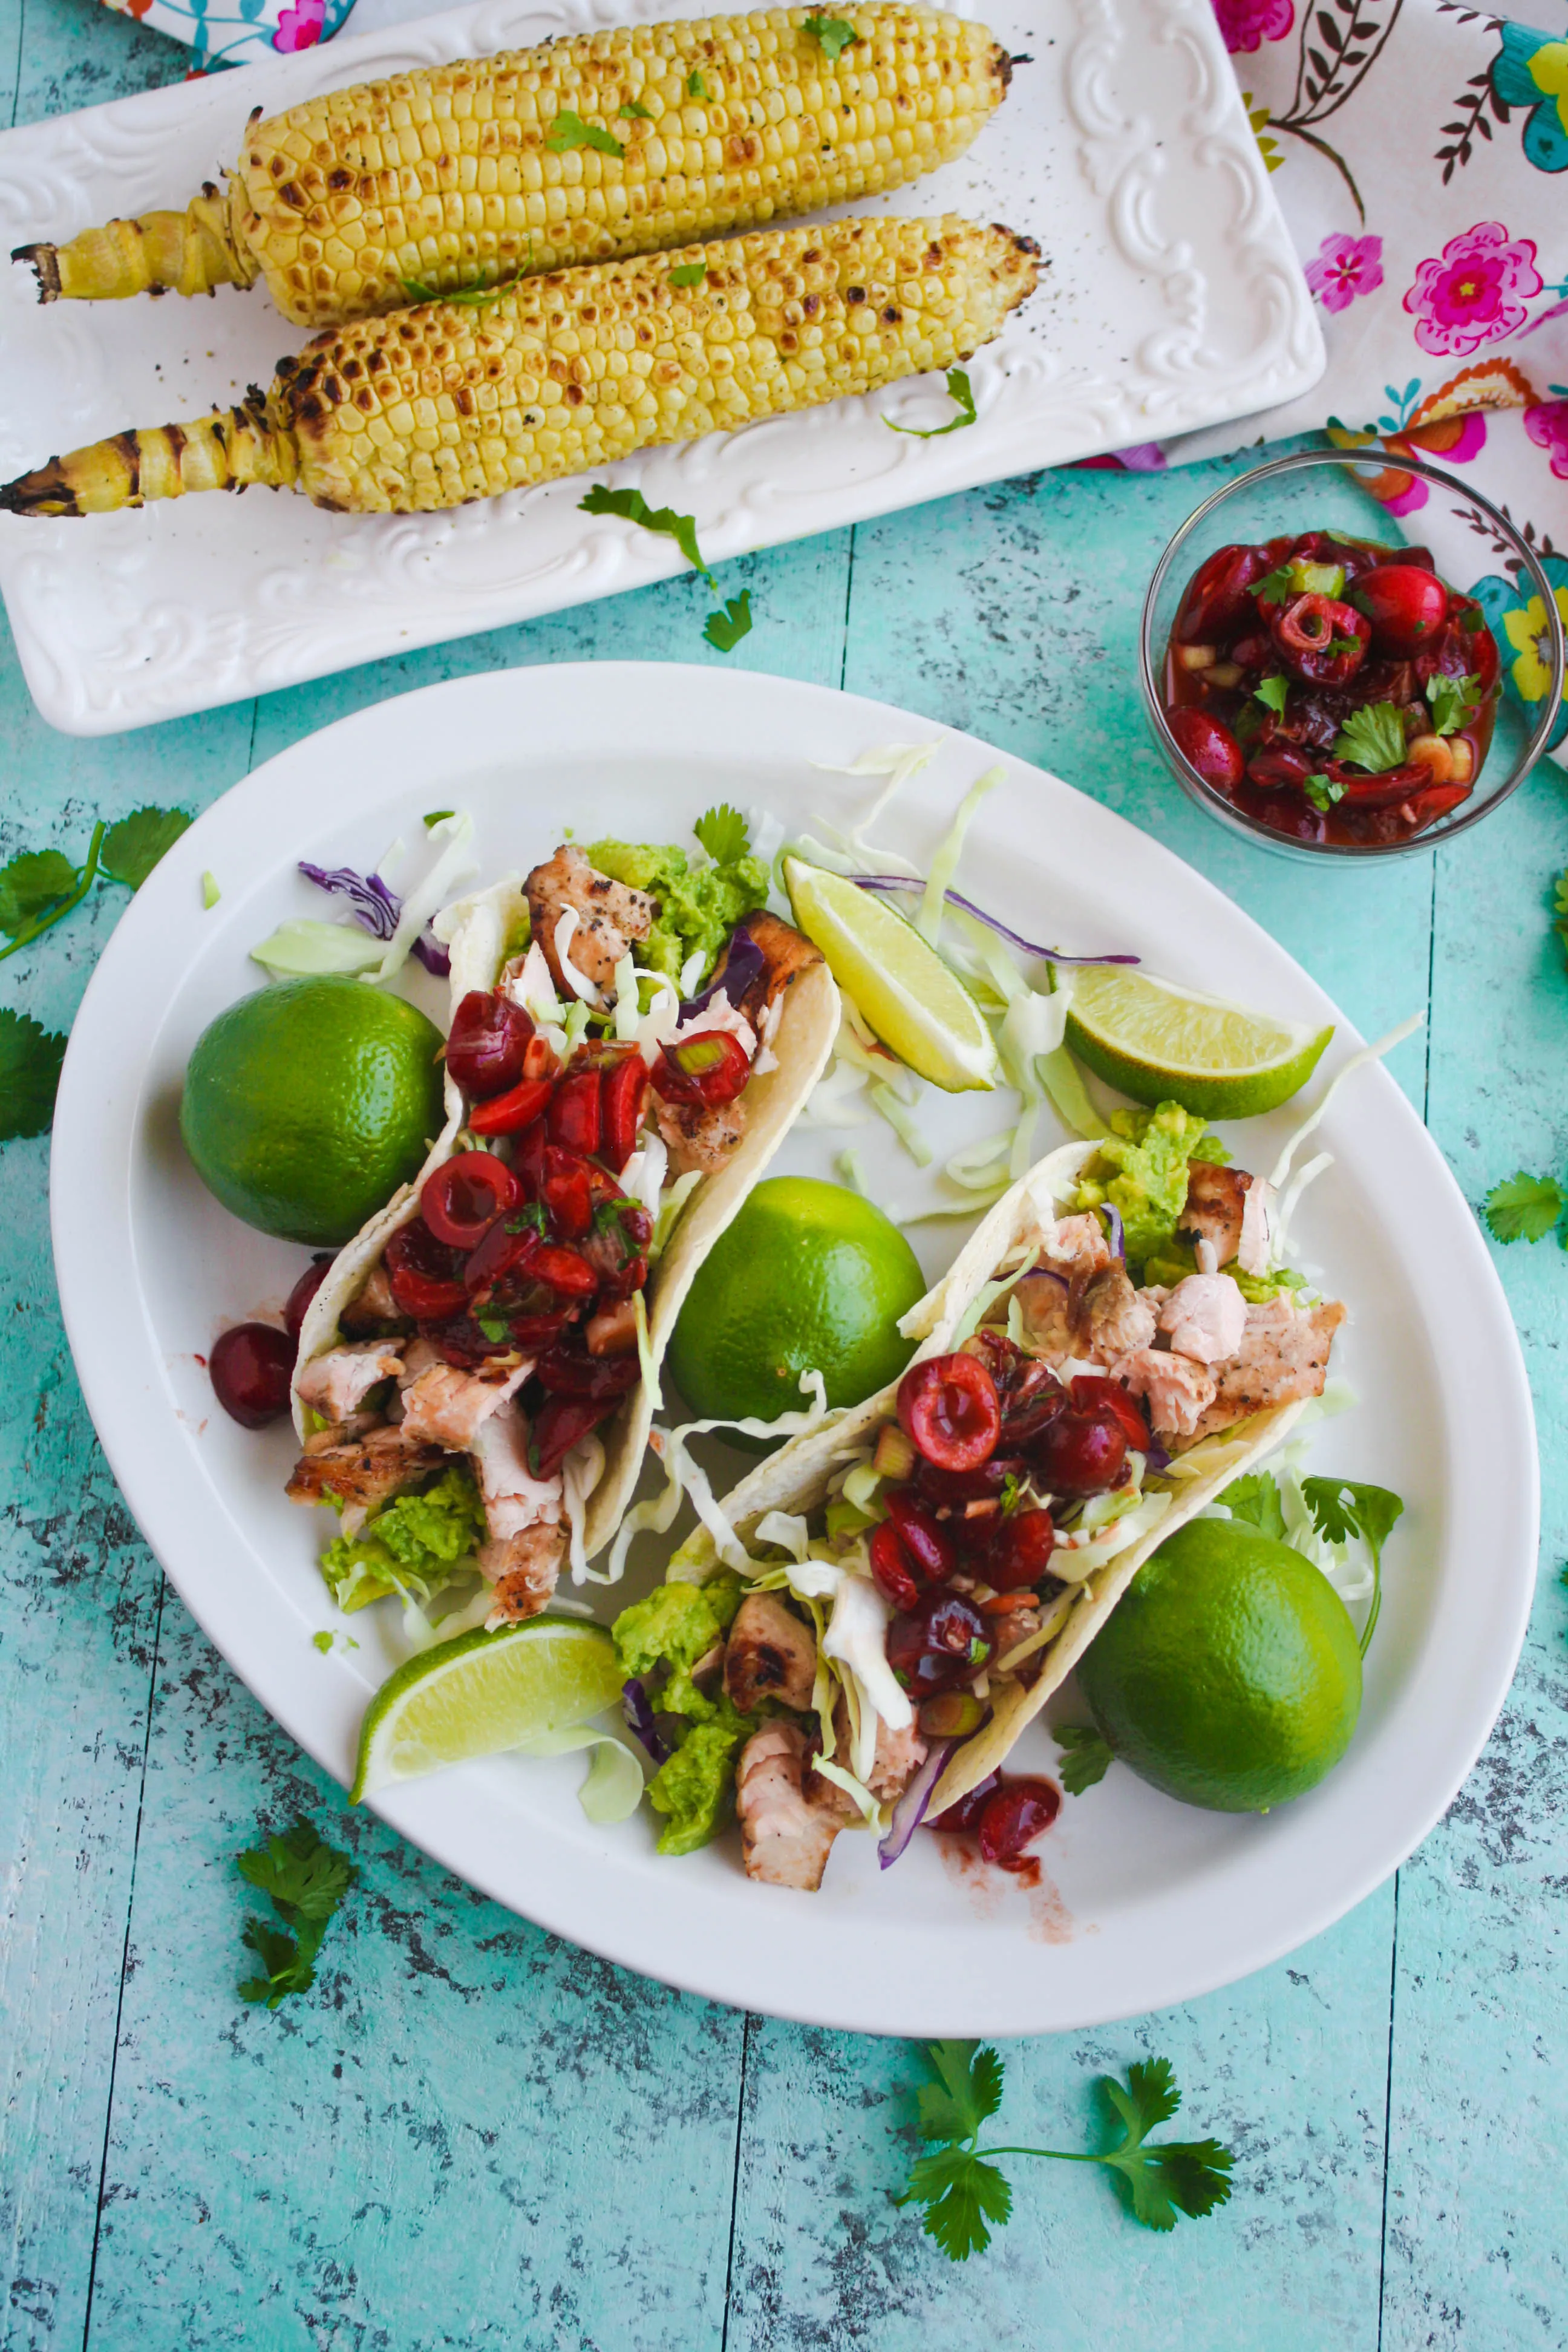 Grilled Salmon Tacos with Fresh Cherry-Chipotle Salsa is a perfect summer dish. Fresh cherries are perfect to top the salmon! Get your grill on!